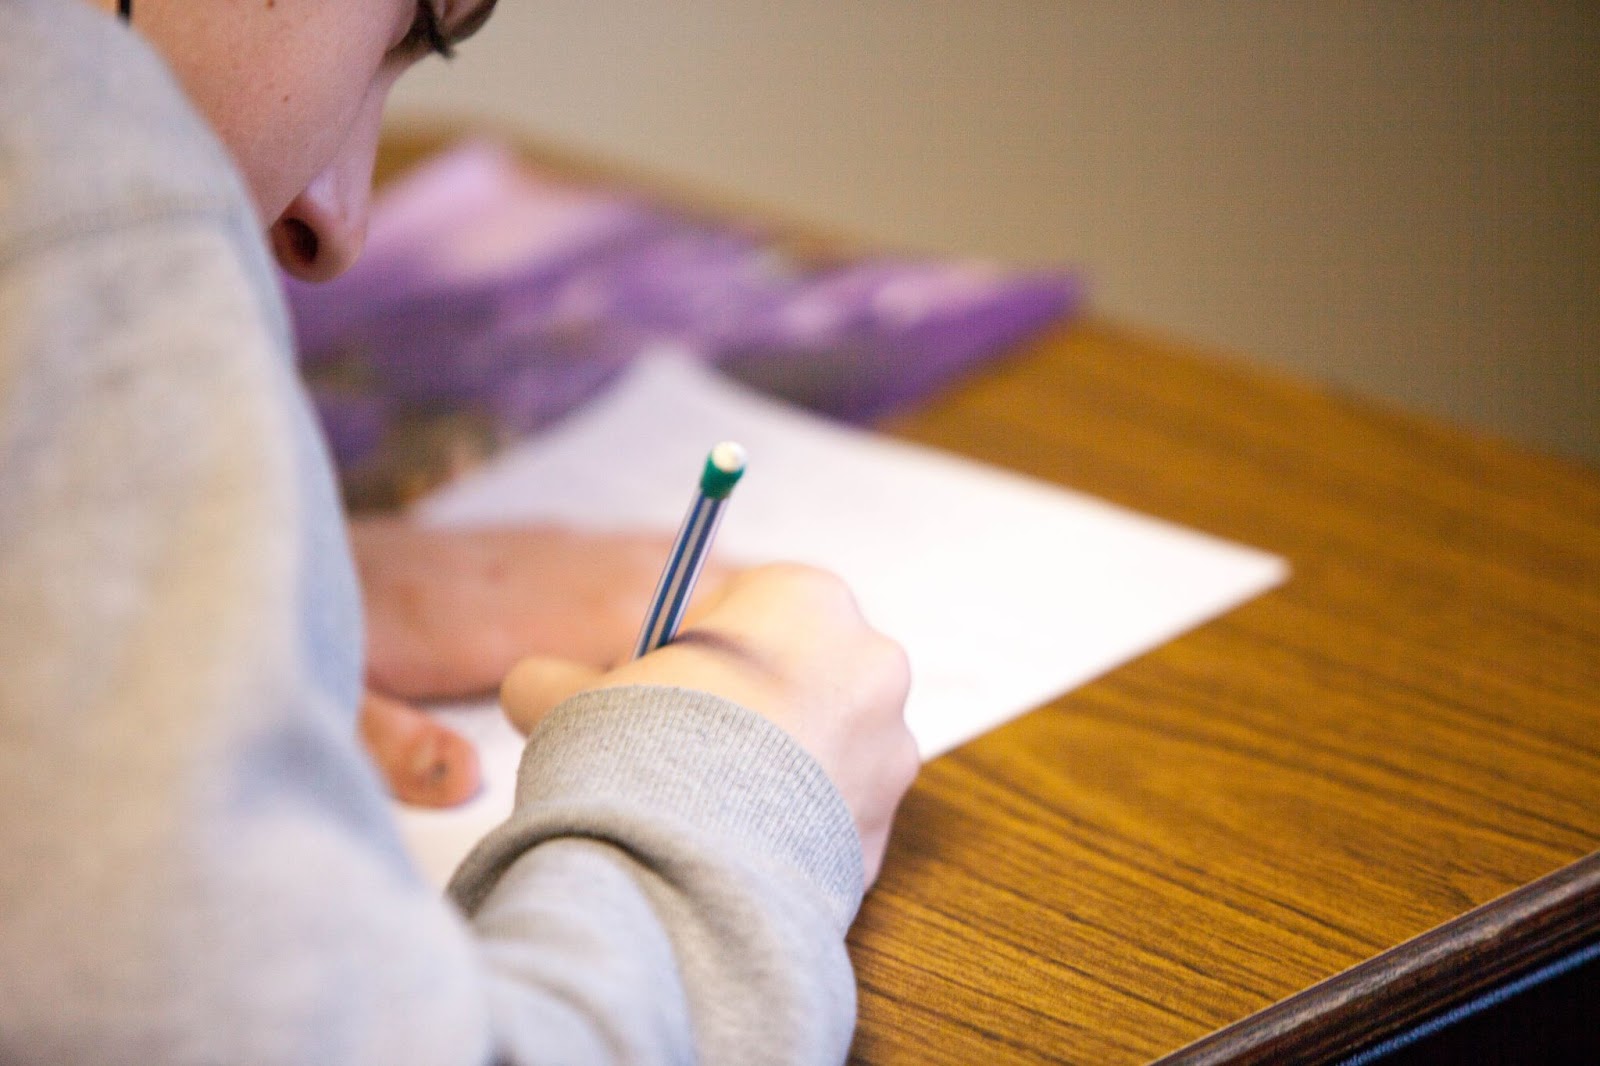 Student taking a writing test with a led pencil - Navigating Racial Bias in Testing